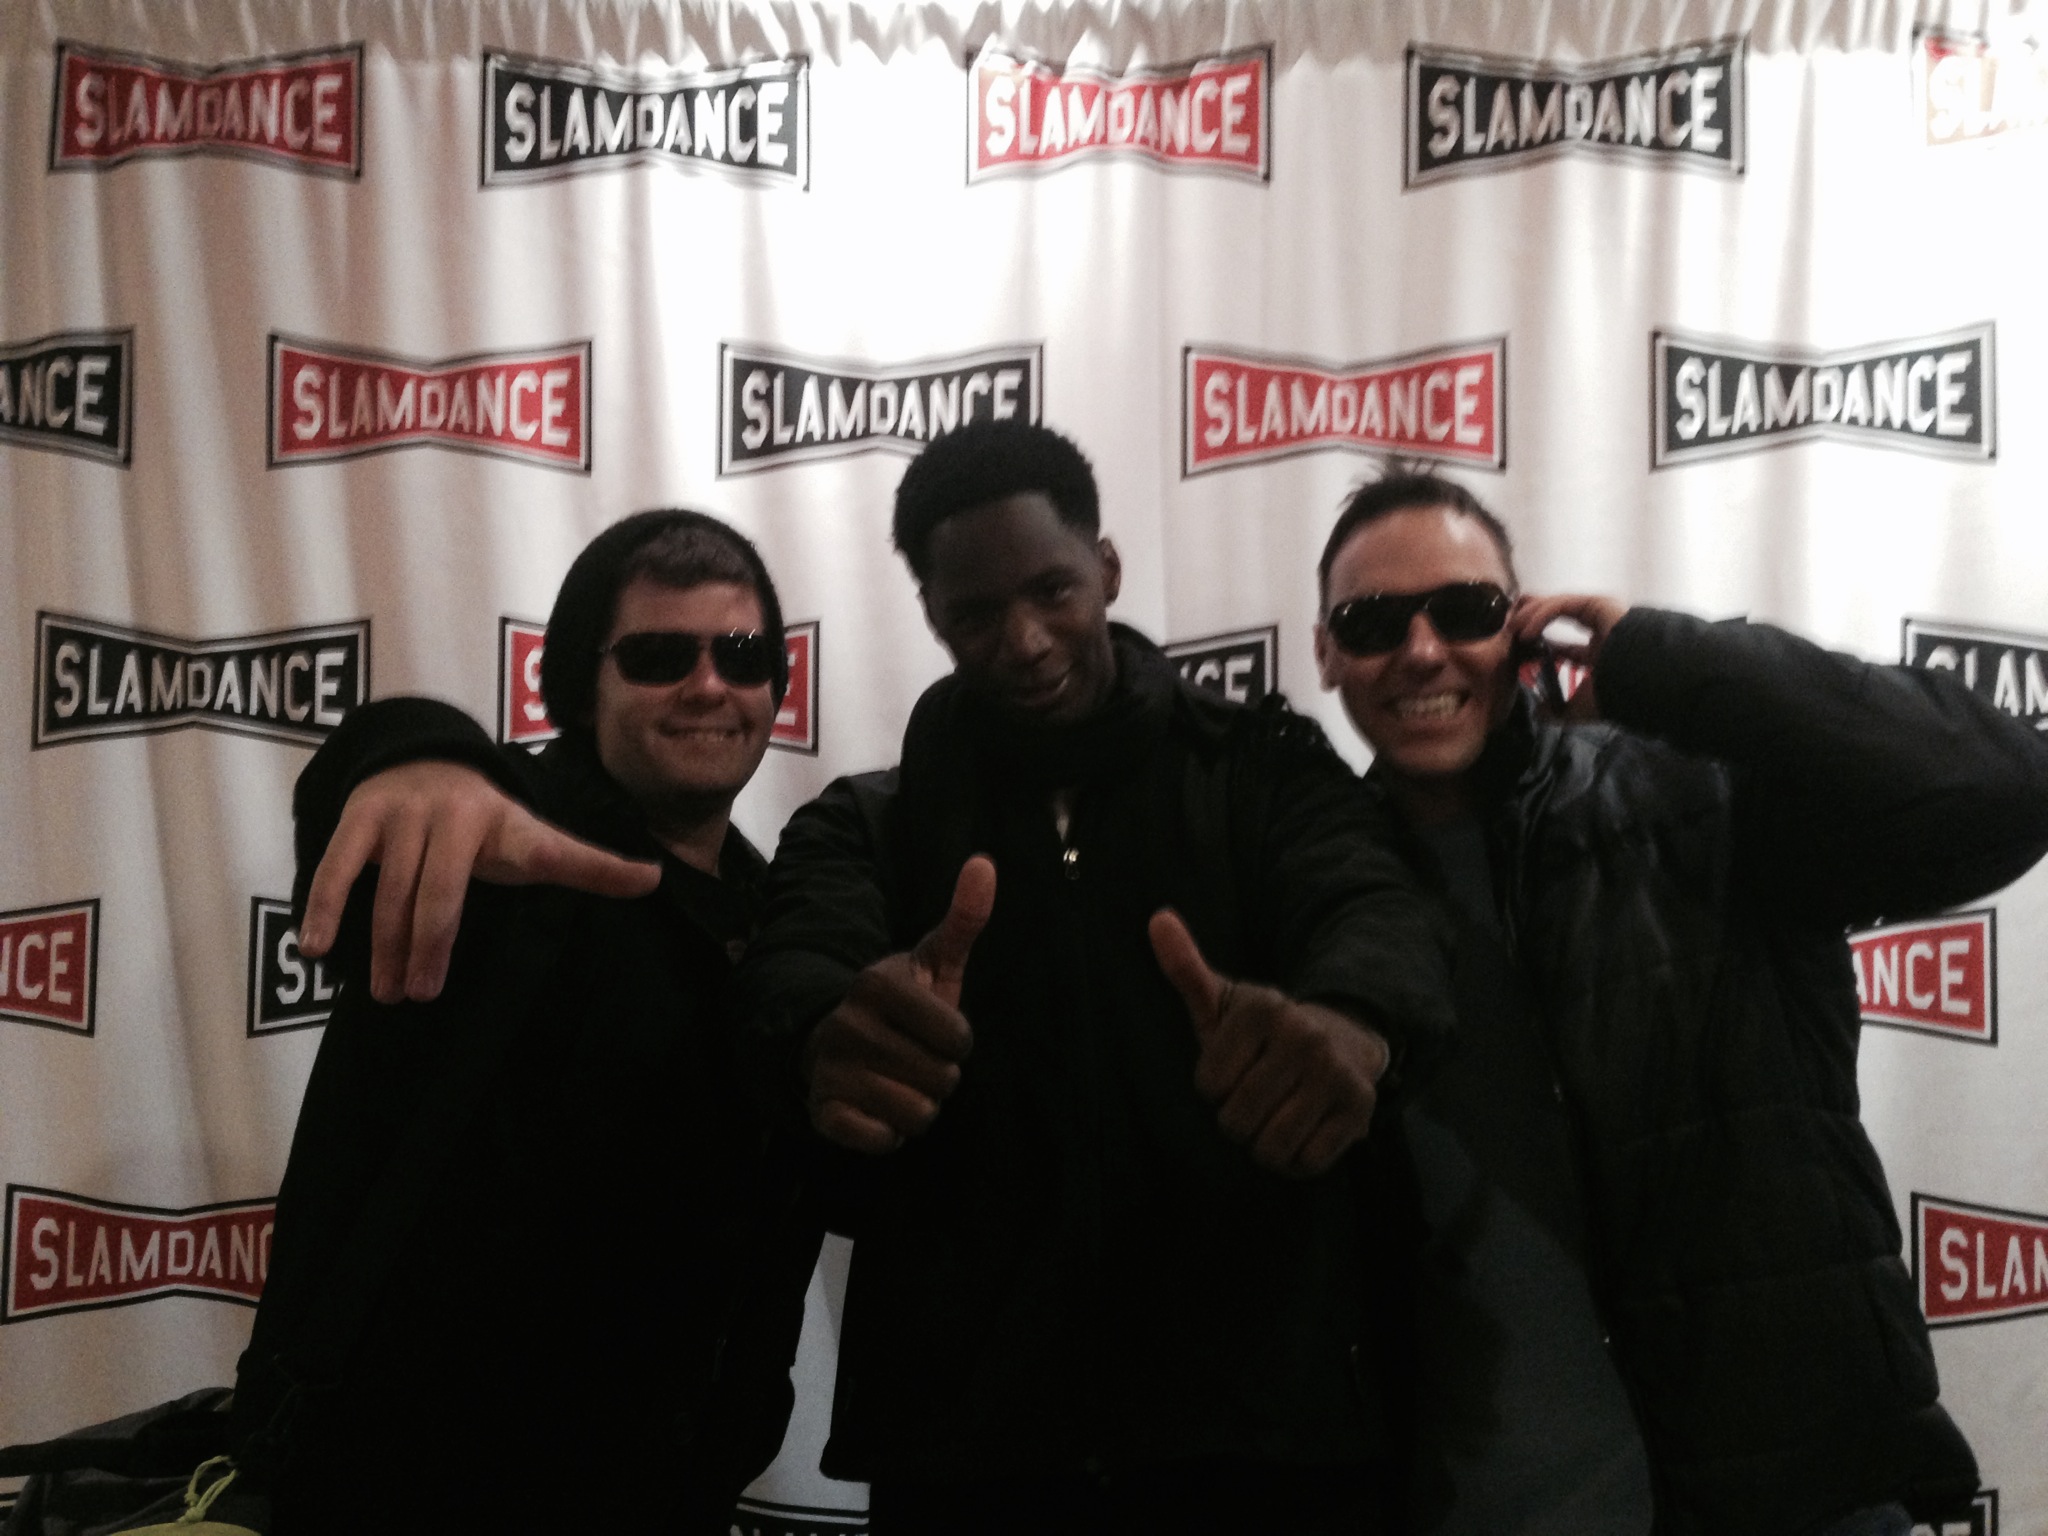 With Actor Rasheed Stephens and Publicist Josh Mitchell at Slamdance Film Festival in Utah